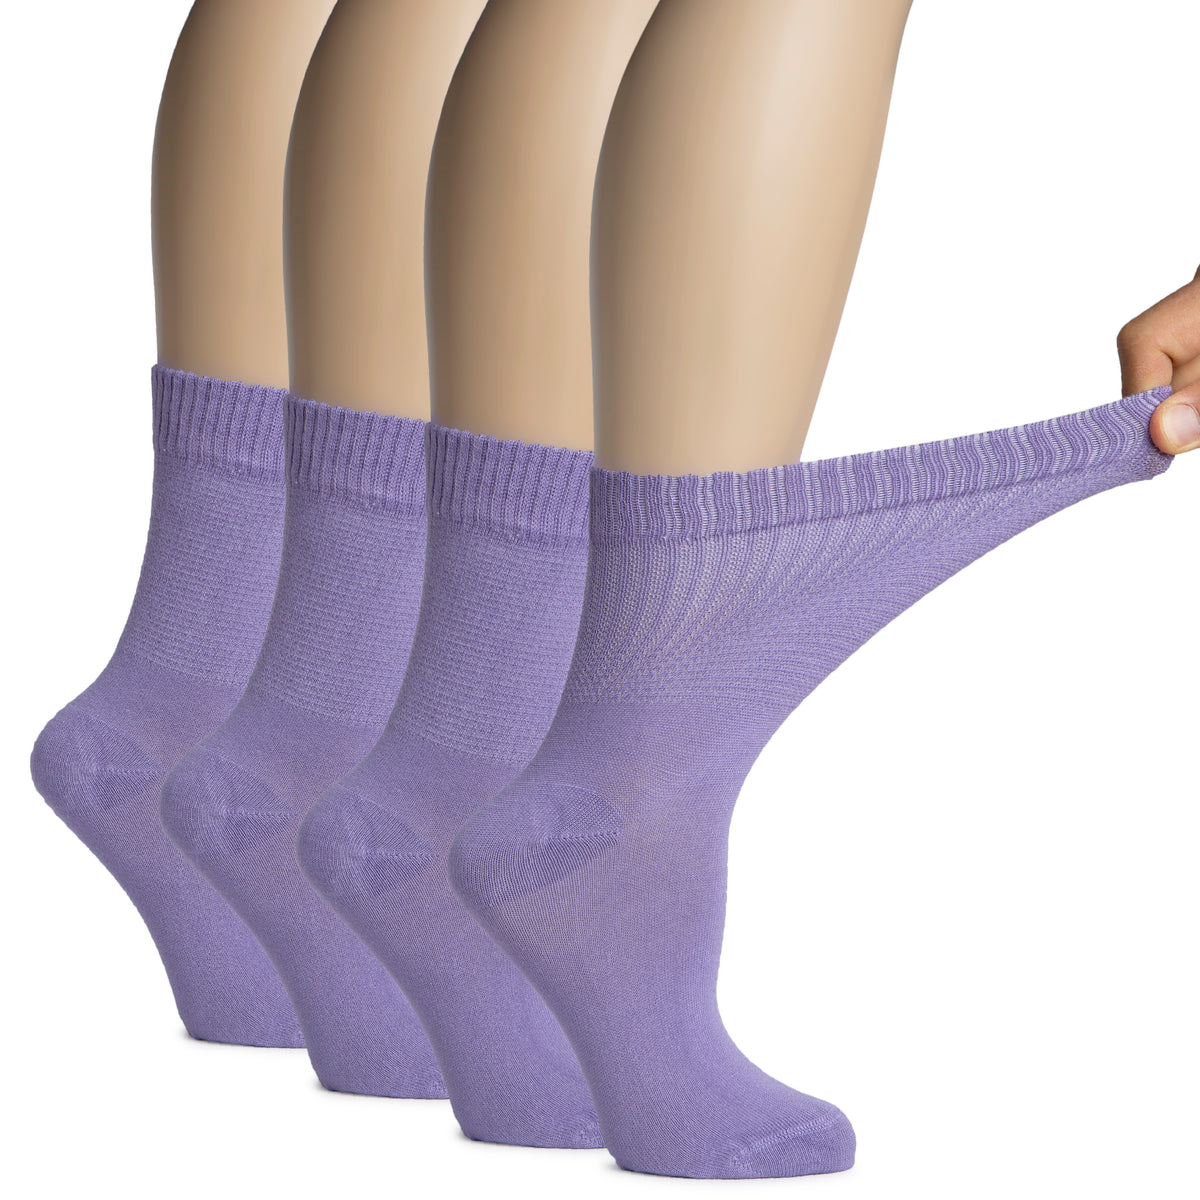 A man's hand rests on a woman's feet adorned in purple socks. The socks are Women's Bamboo Diabetic Crew Socks.